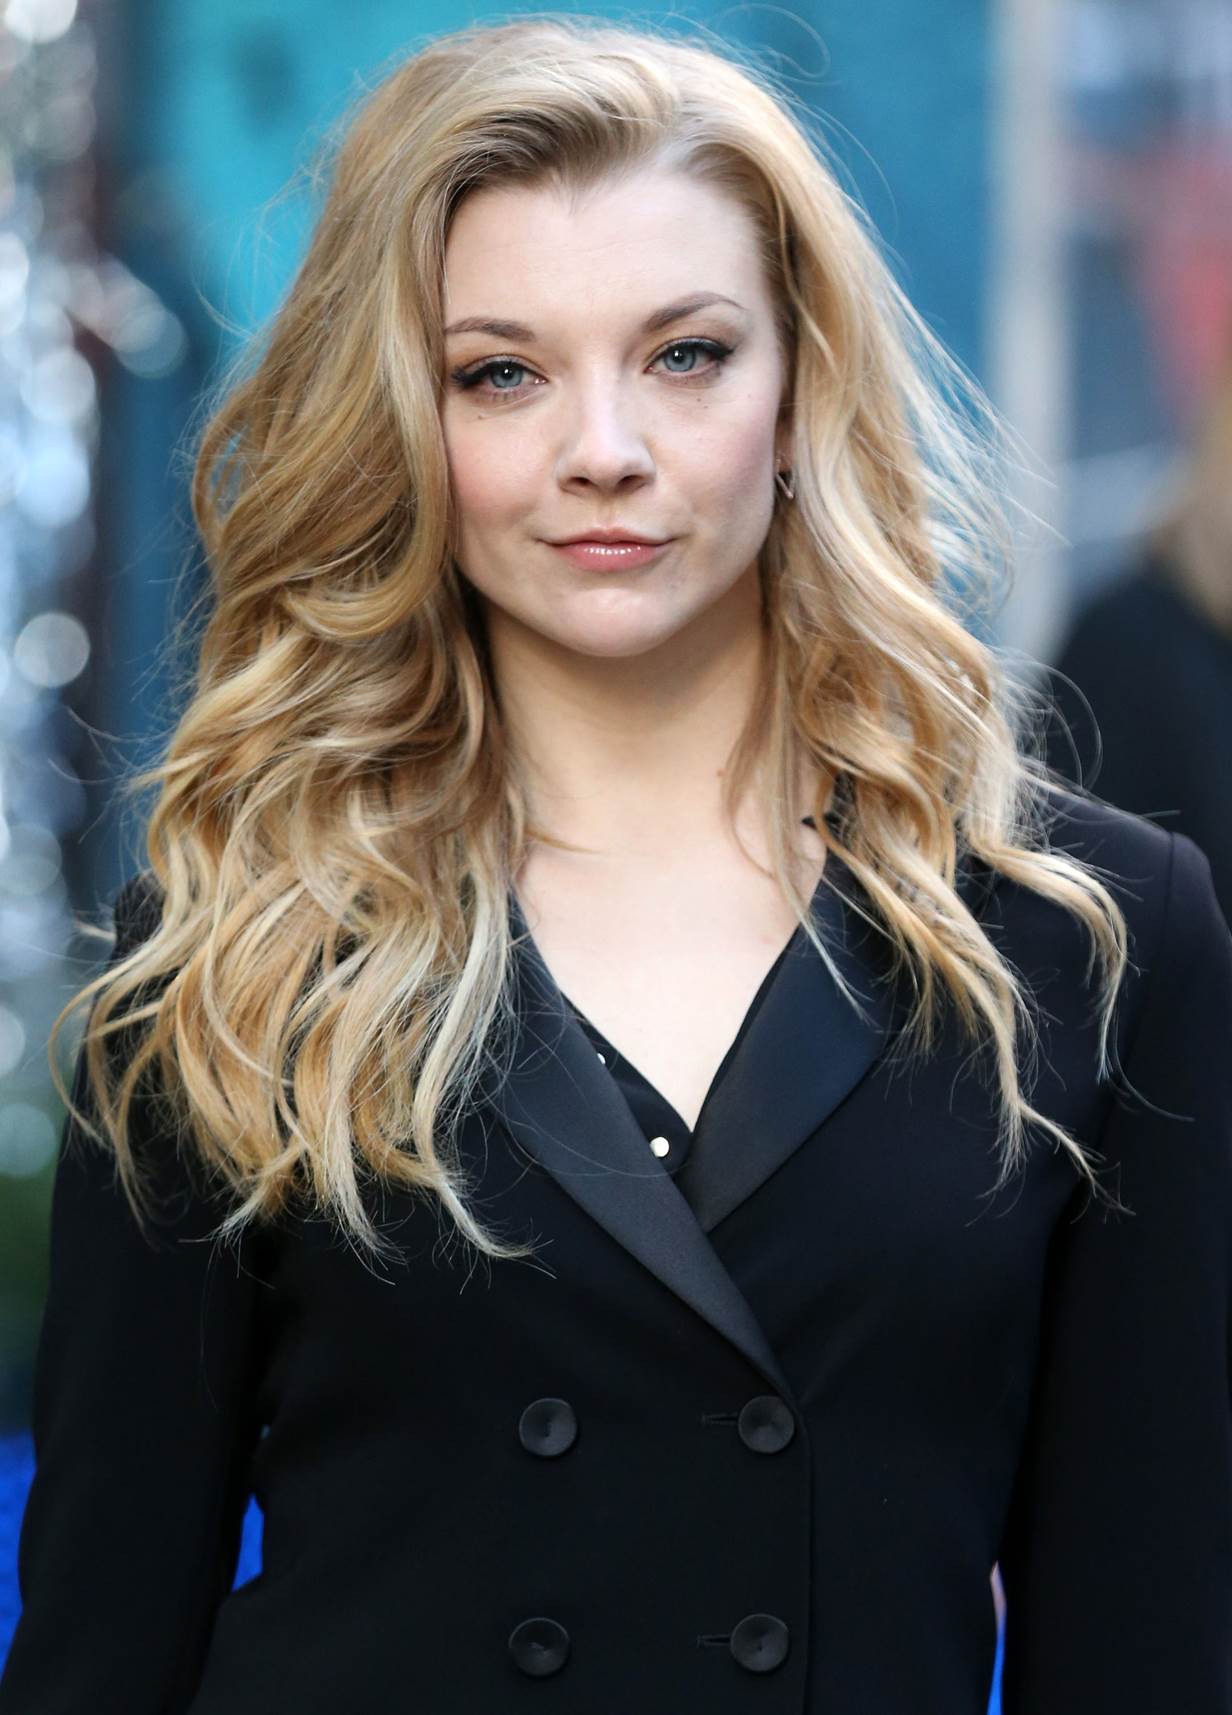 Game Of Thrones Star Natalie Dormer Shares Life-Changing 